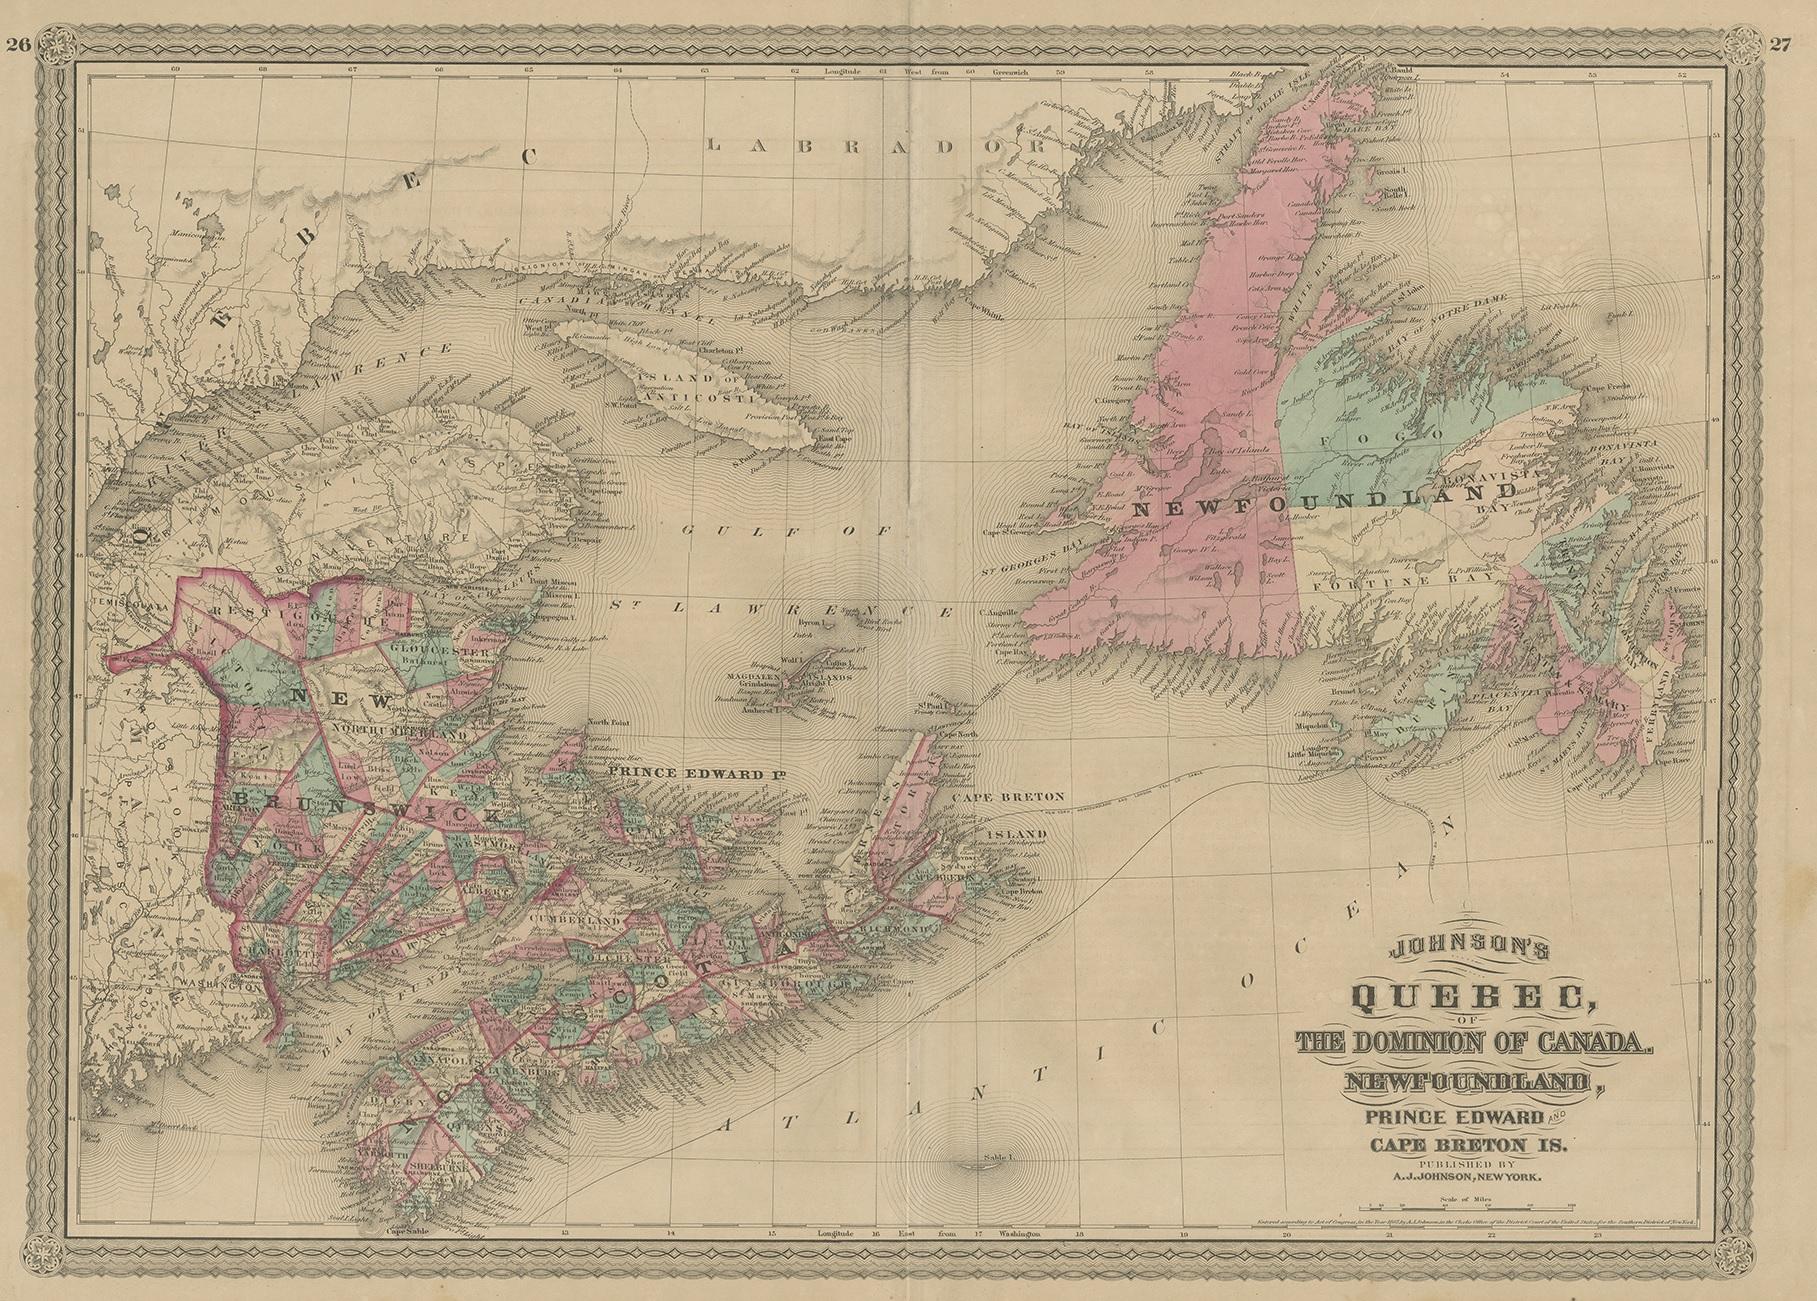 Antique map titled 'Johnson's Quebec, of the dominion of Canada (..)'. Original map of New Brunswick, Nova Scotia, Newfoundland and Prince Edward Island. This map originates from 'Johnson's New Illustrated Family Atlas of the World' by A.J. Johnson.